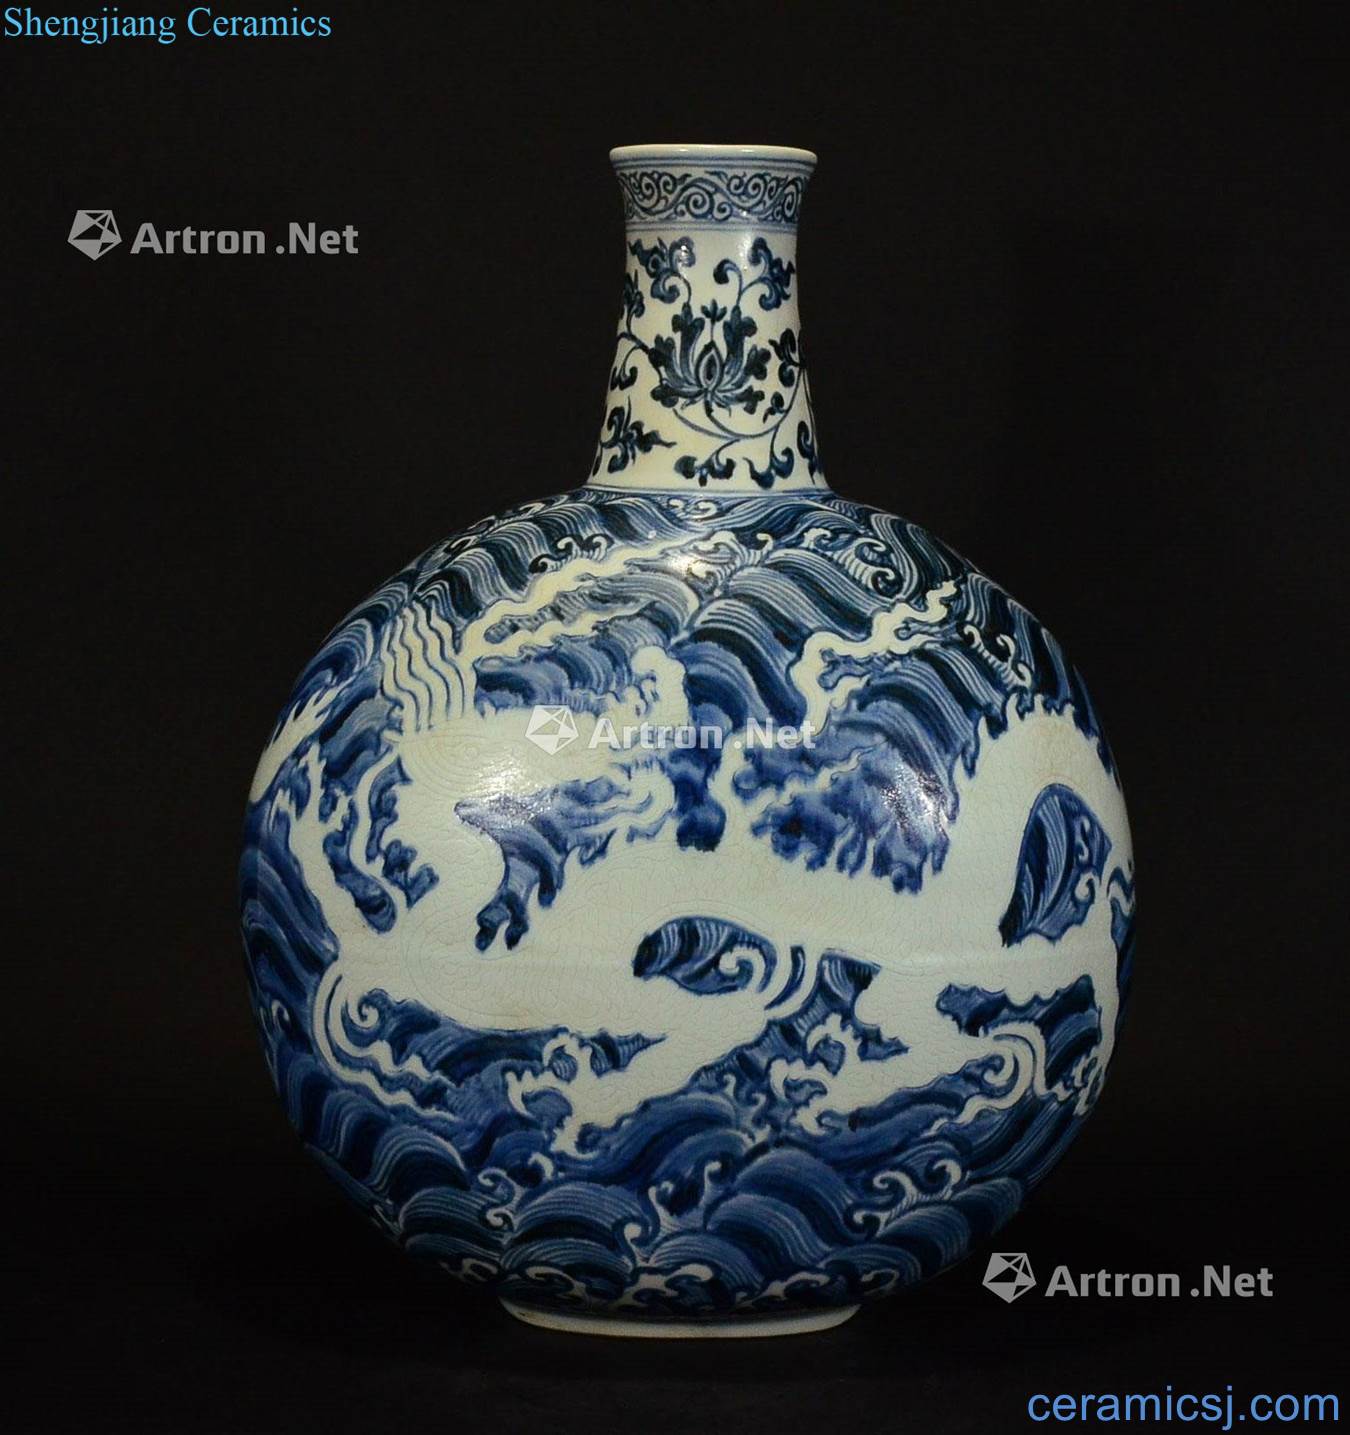 Ming or after Blue and white sea dragon pattern on bottles